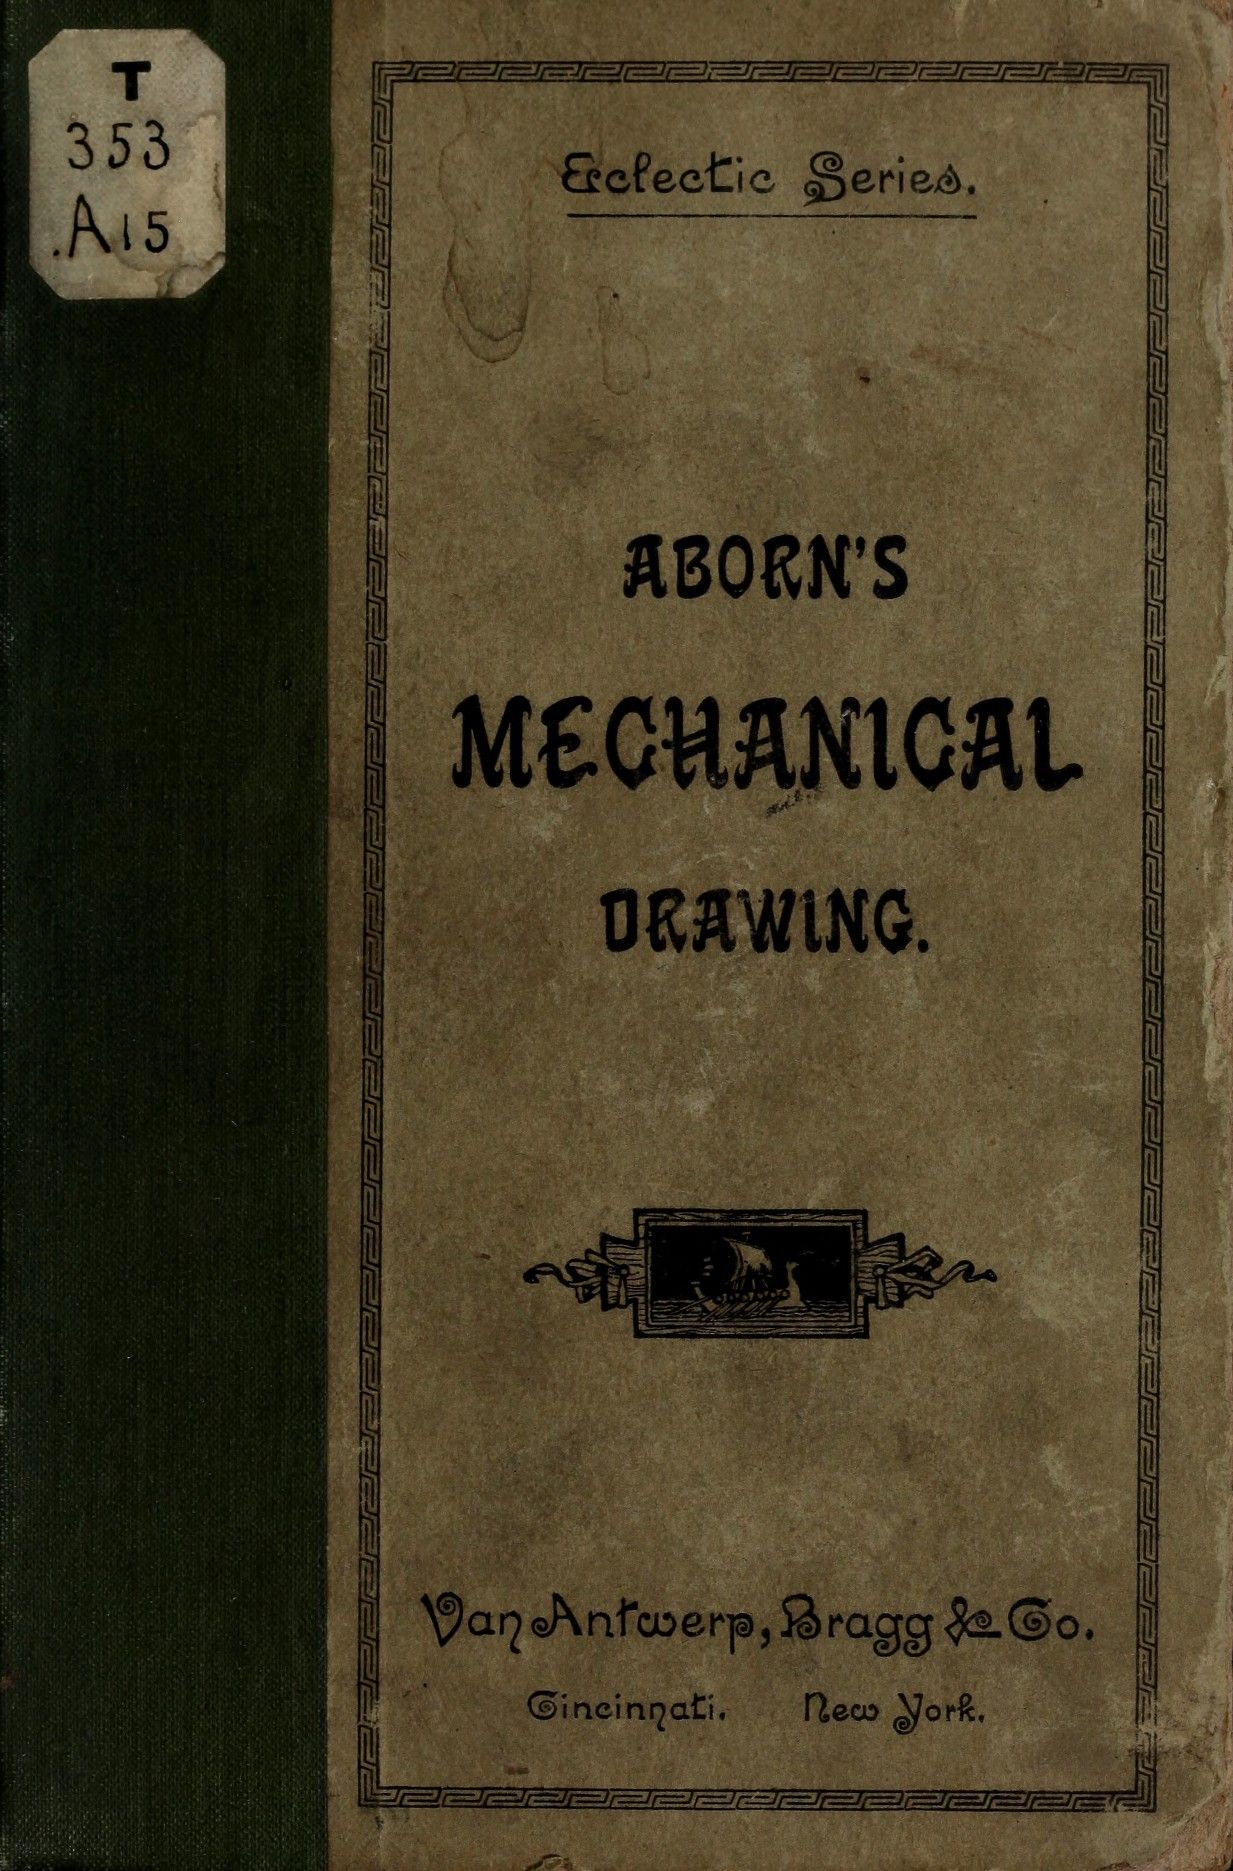 [Frank Aborn] Elementary mechanical drawing, for school and shop [English] 2